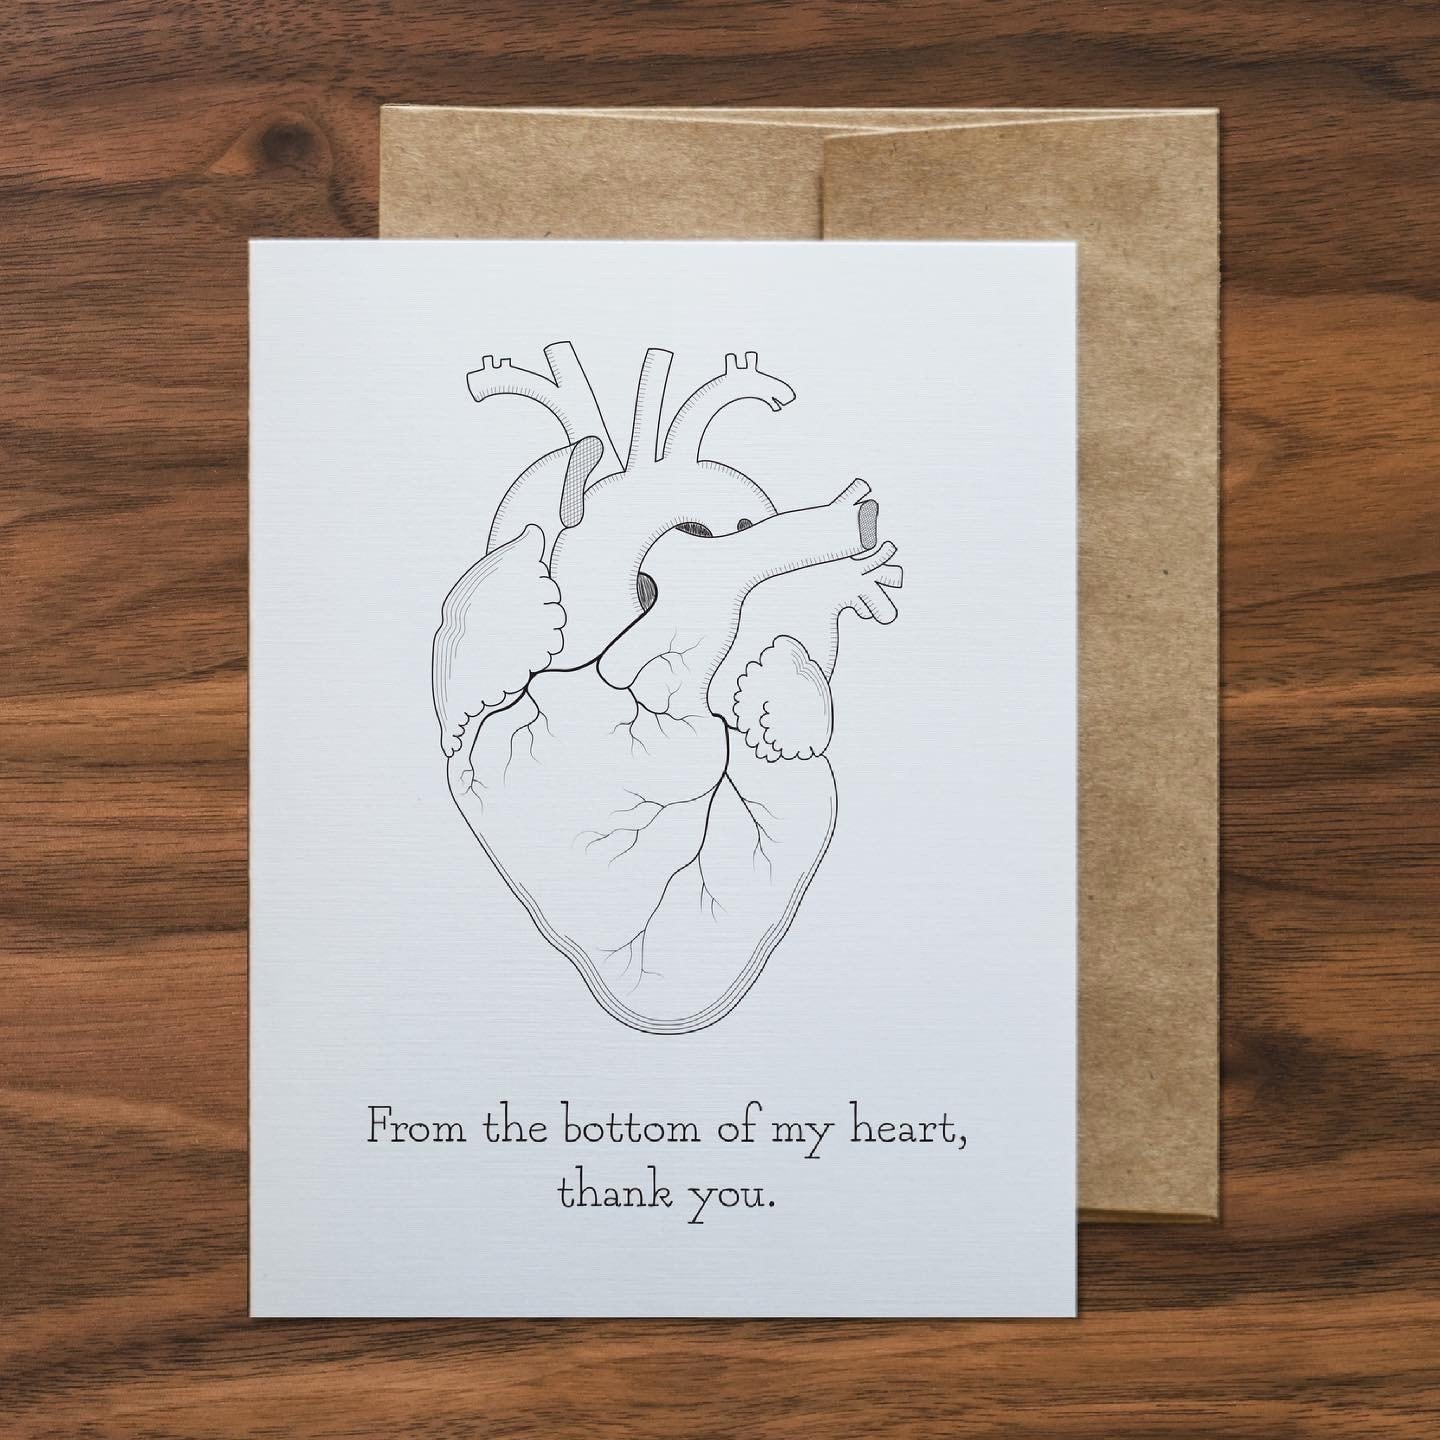 Thank You Heart Shaped Letterpress Greeting Card